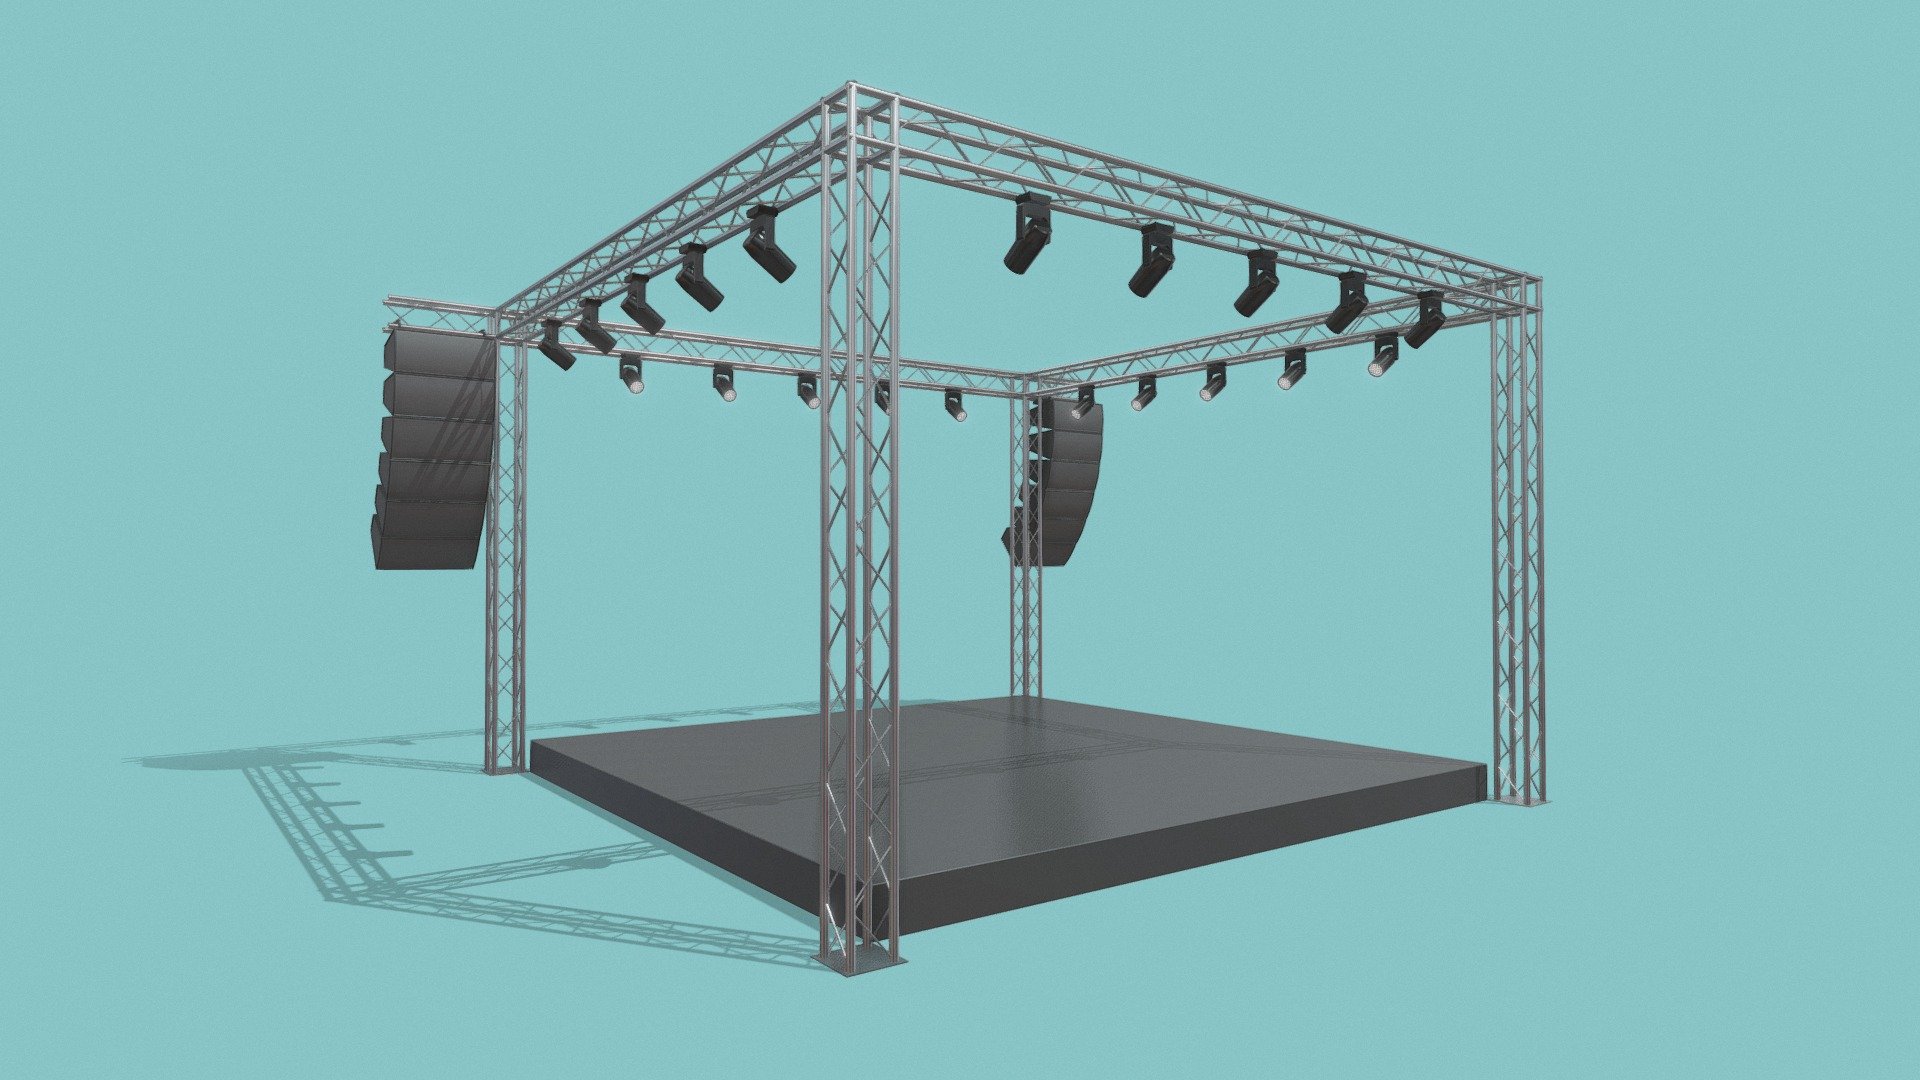 Concert Stage 12

Measurements:




Platform is: Base: 6m x 6m, Height: 0.3m

Inner height (from the top of the platform to the lower part of the truss): 3.7m

Total height from bottom to top: 4.35m

IMPORTANT NOTES:




This model does not have textures or materials, but it has separate generic materials, it is also separated into parts, so you can easily assign your own materials.

If you have any doubts or questions about this model, you can send us a message 3d model